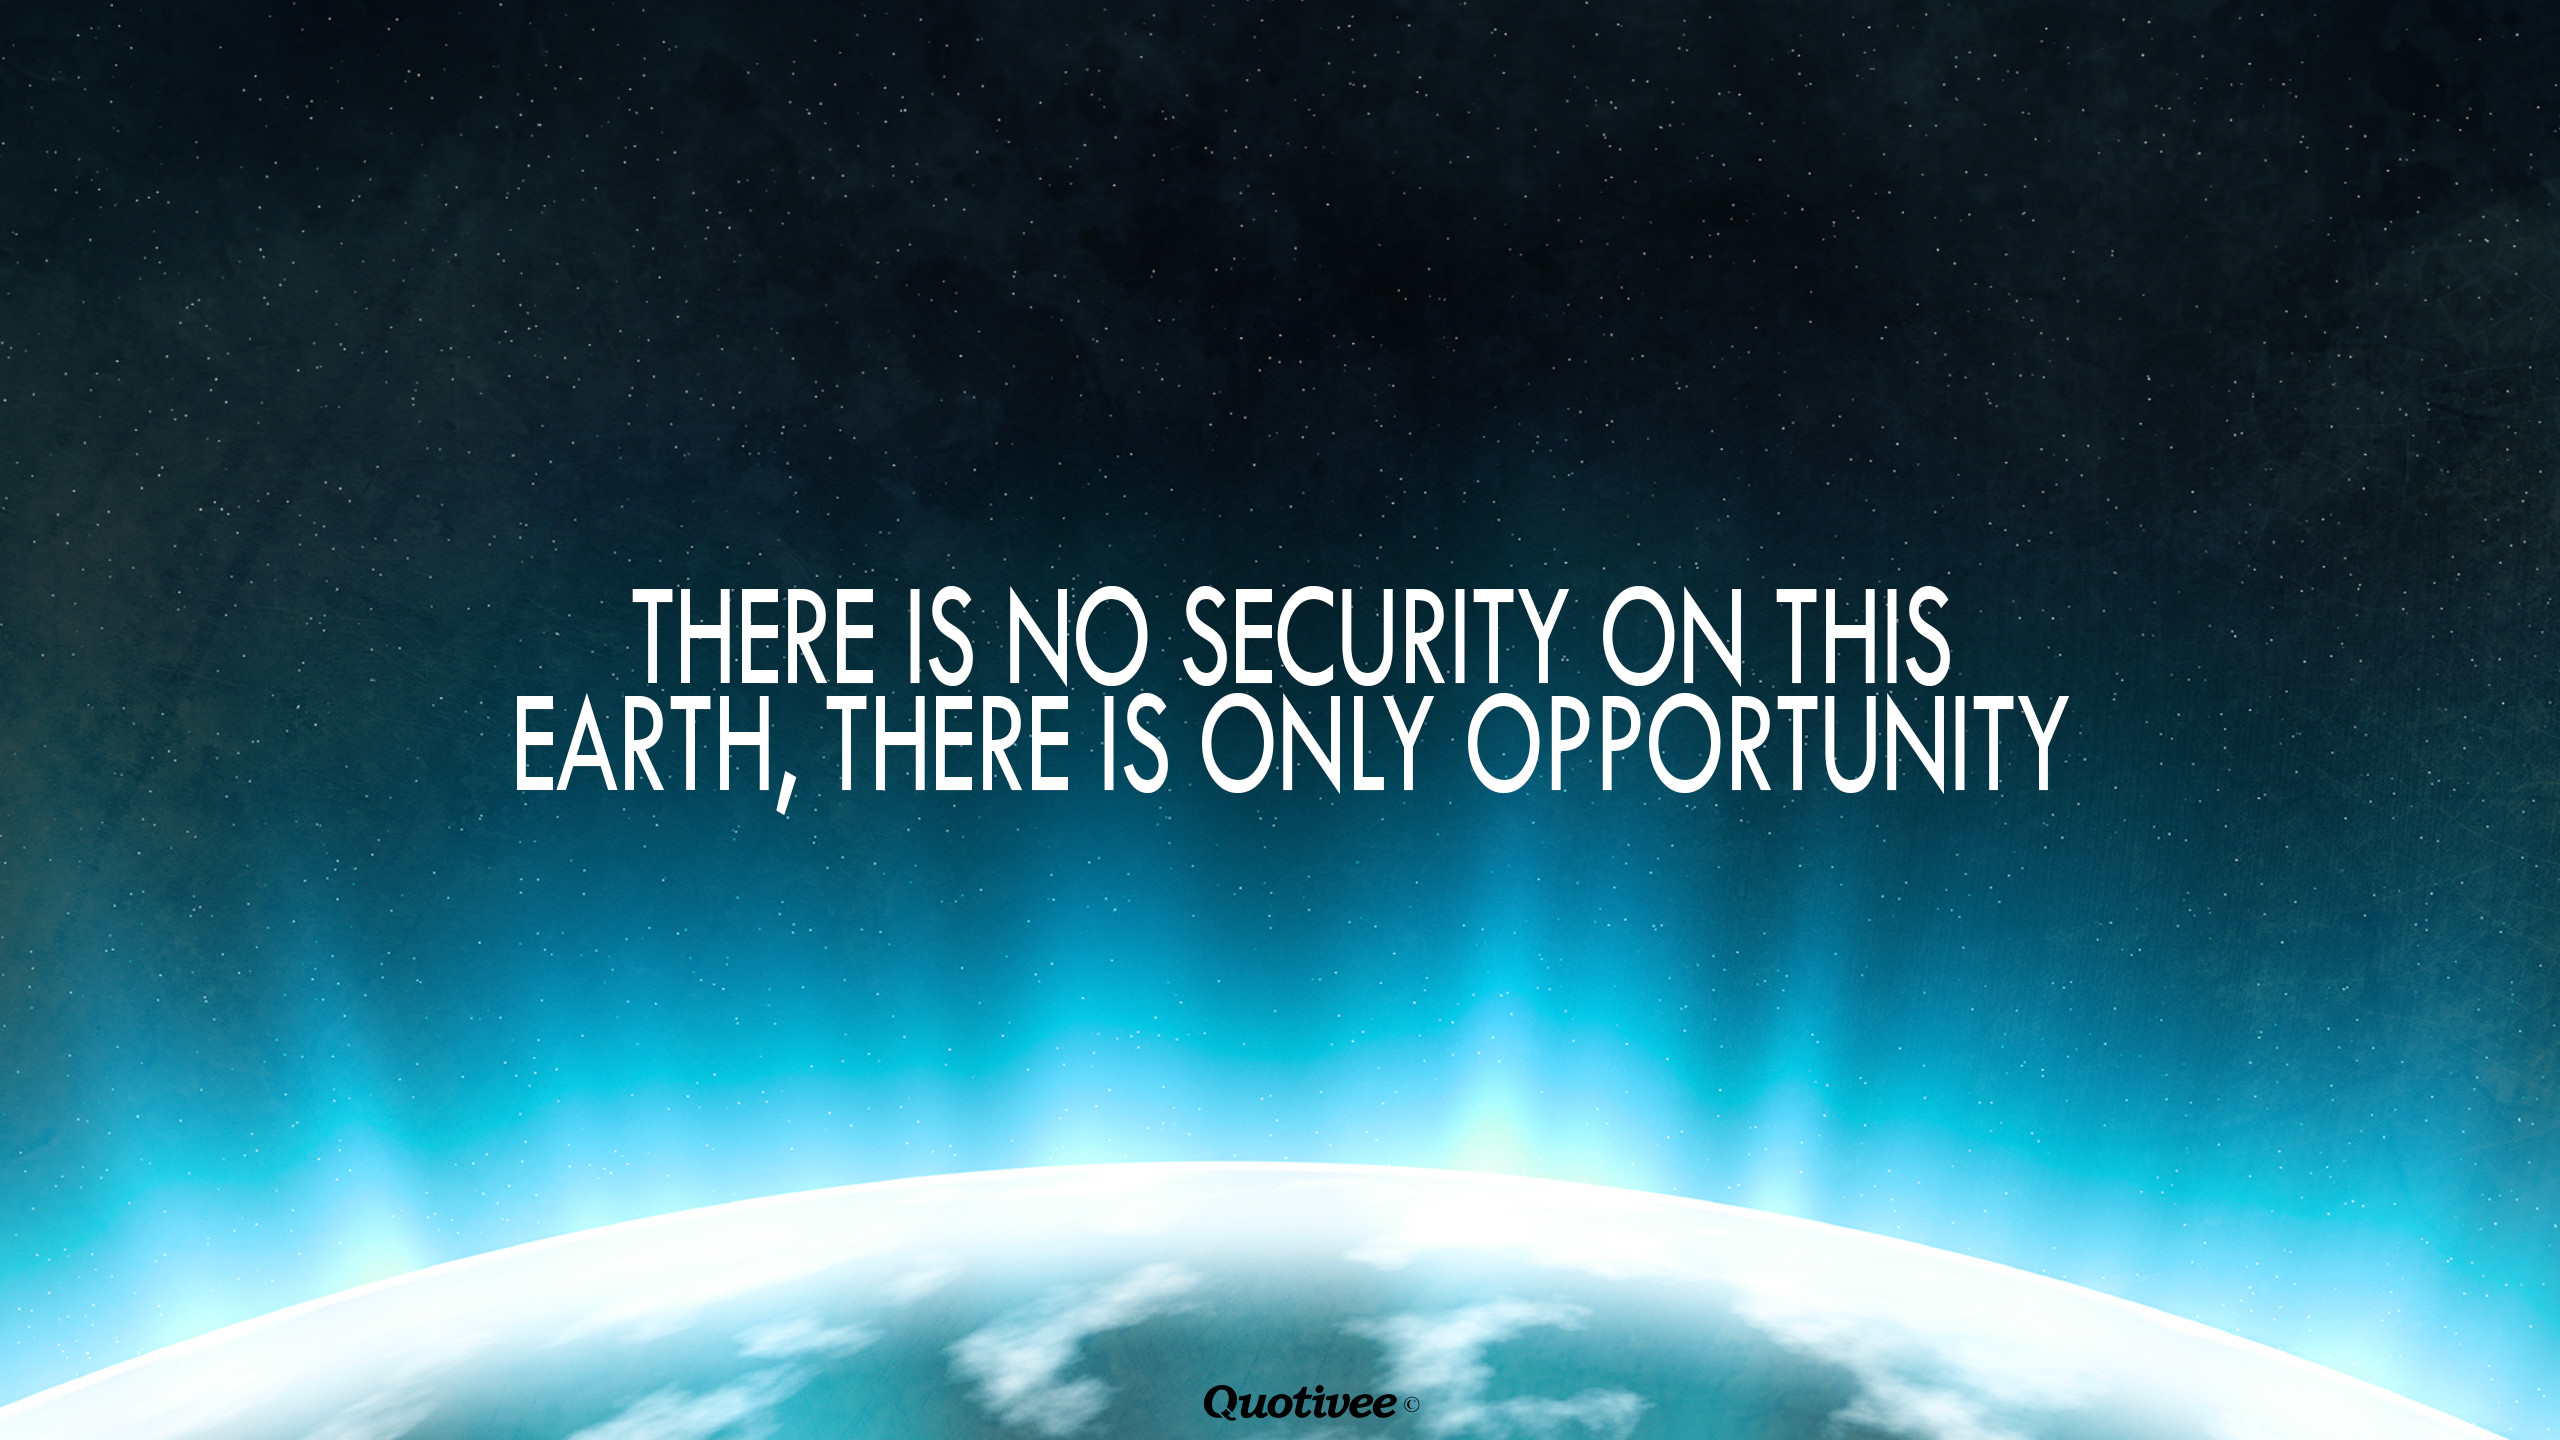 2560x1440 There Is No Security - Inspirational Quotes | Quotivee